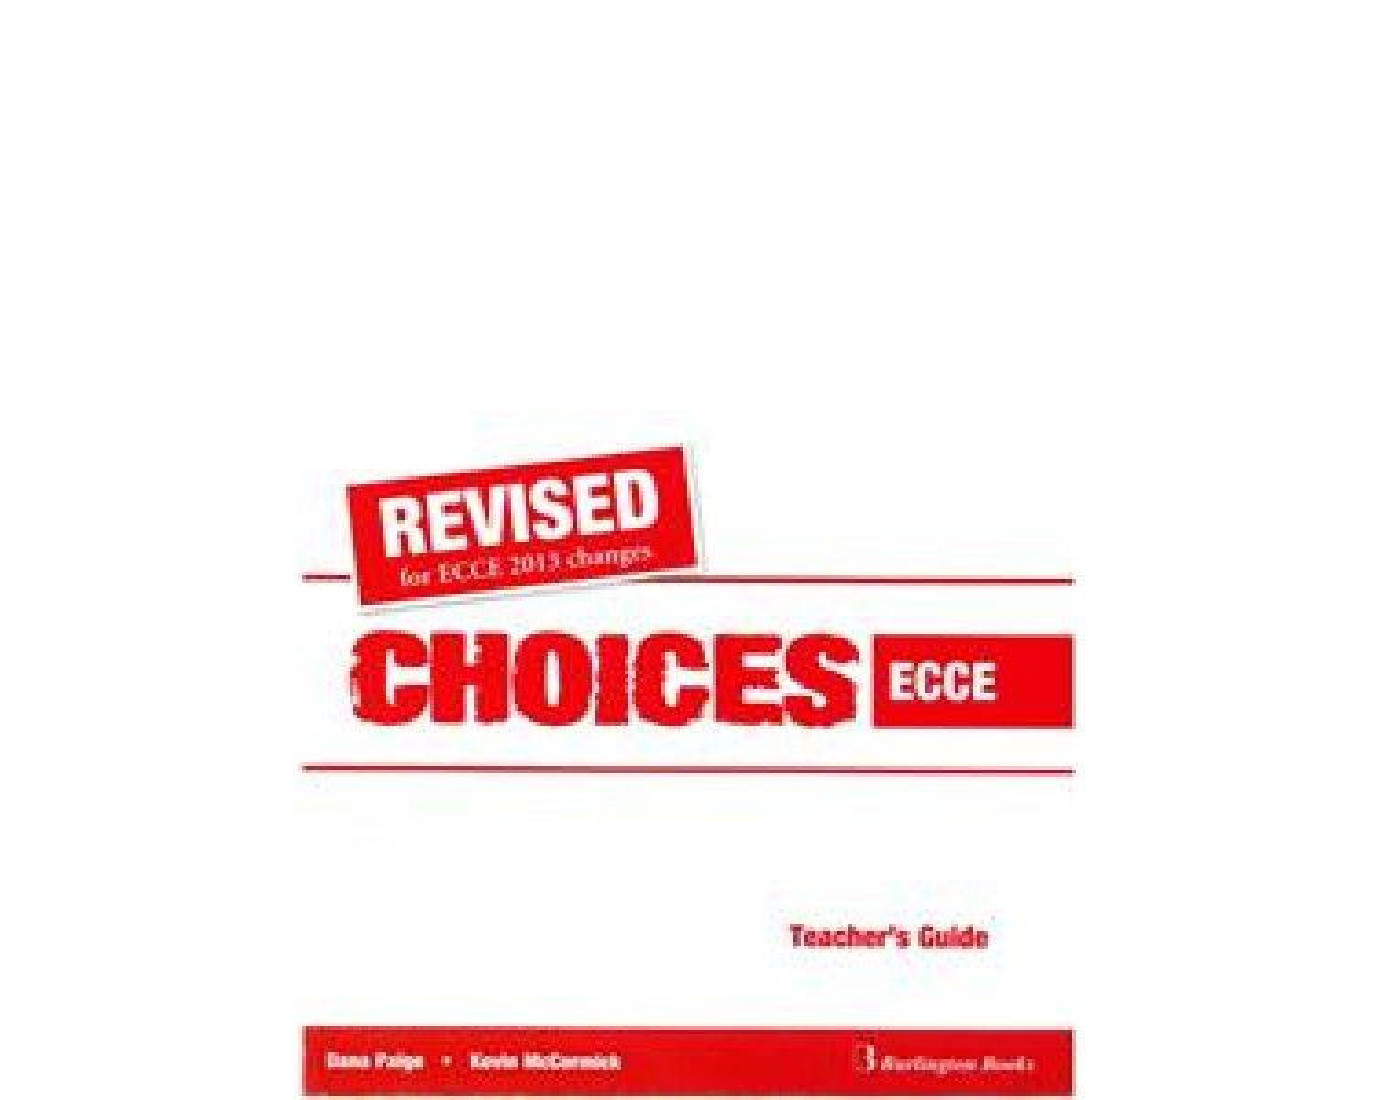 CHOICES ECCE TEACHERS GUIDE REVISED